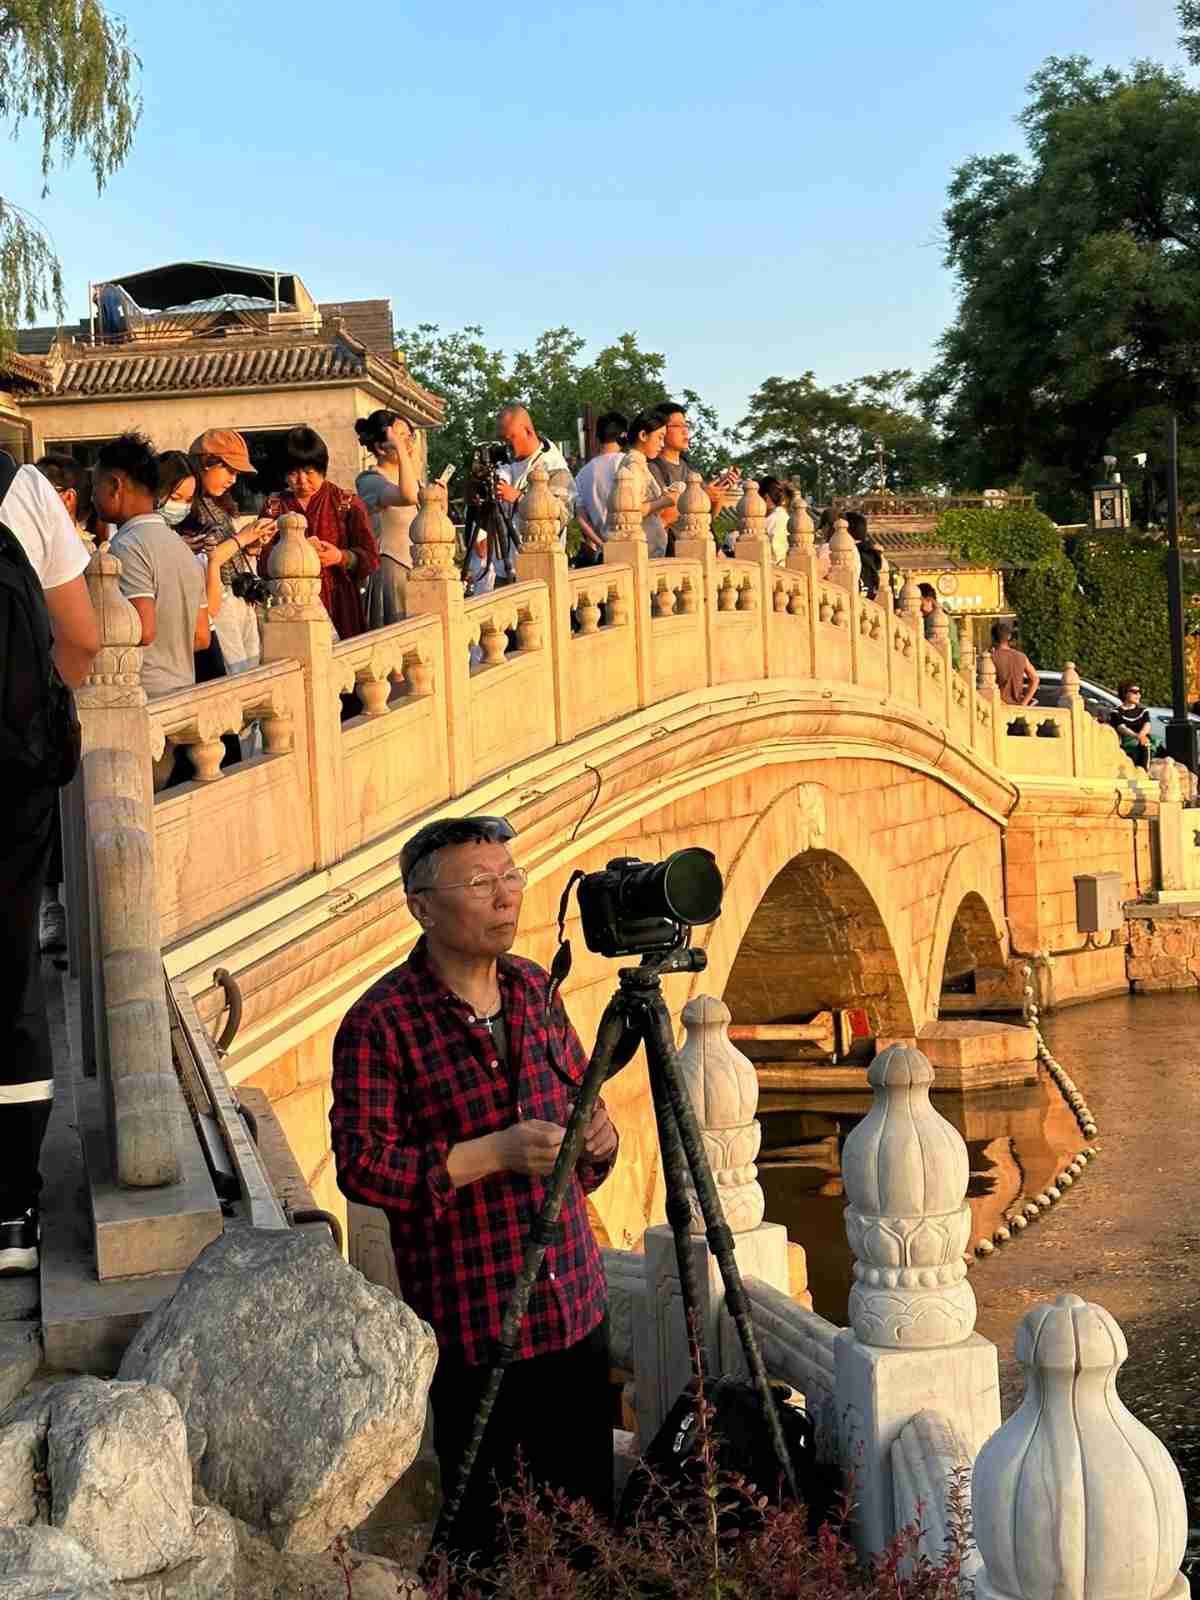 People photographing sunset in the hutongs